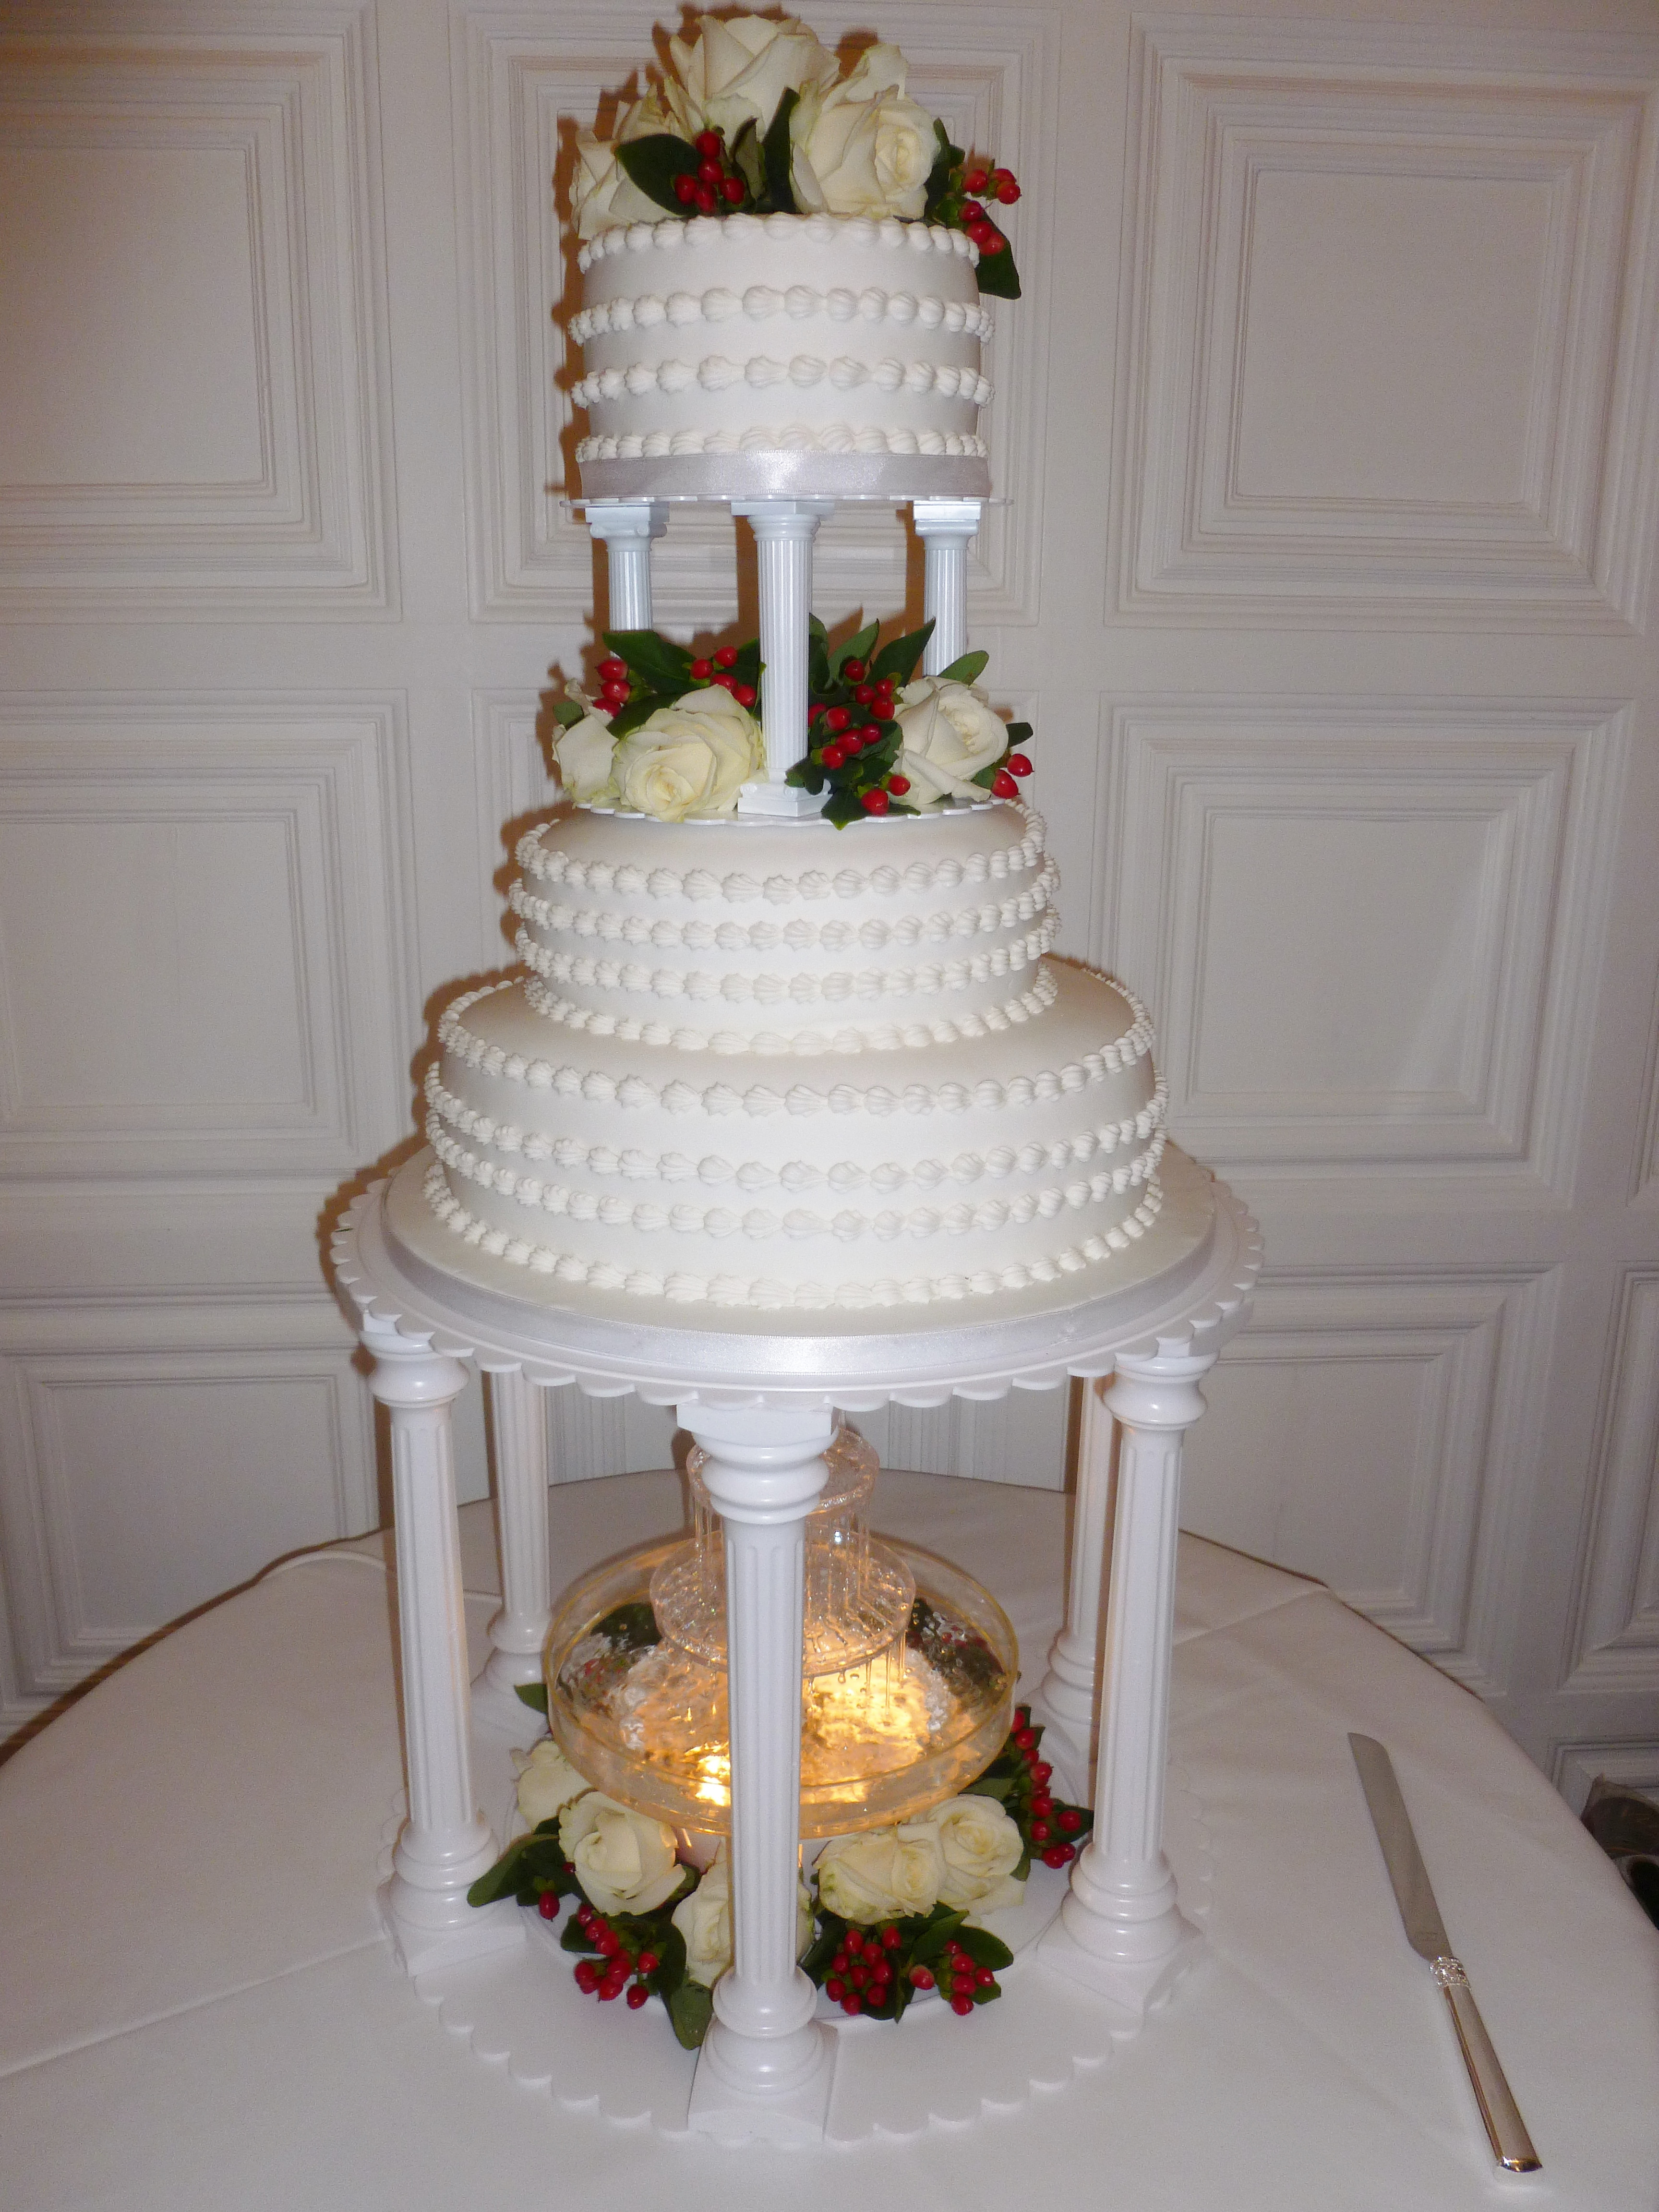 Wedding Cakes With Water Fountain
 Wedding Cake Water Fountain